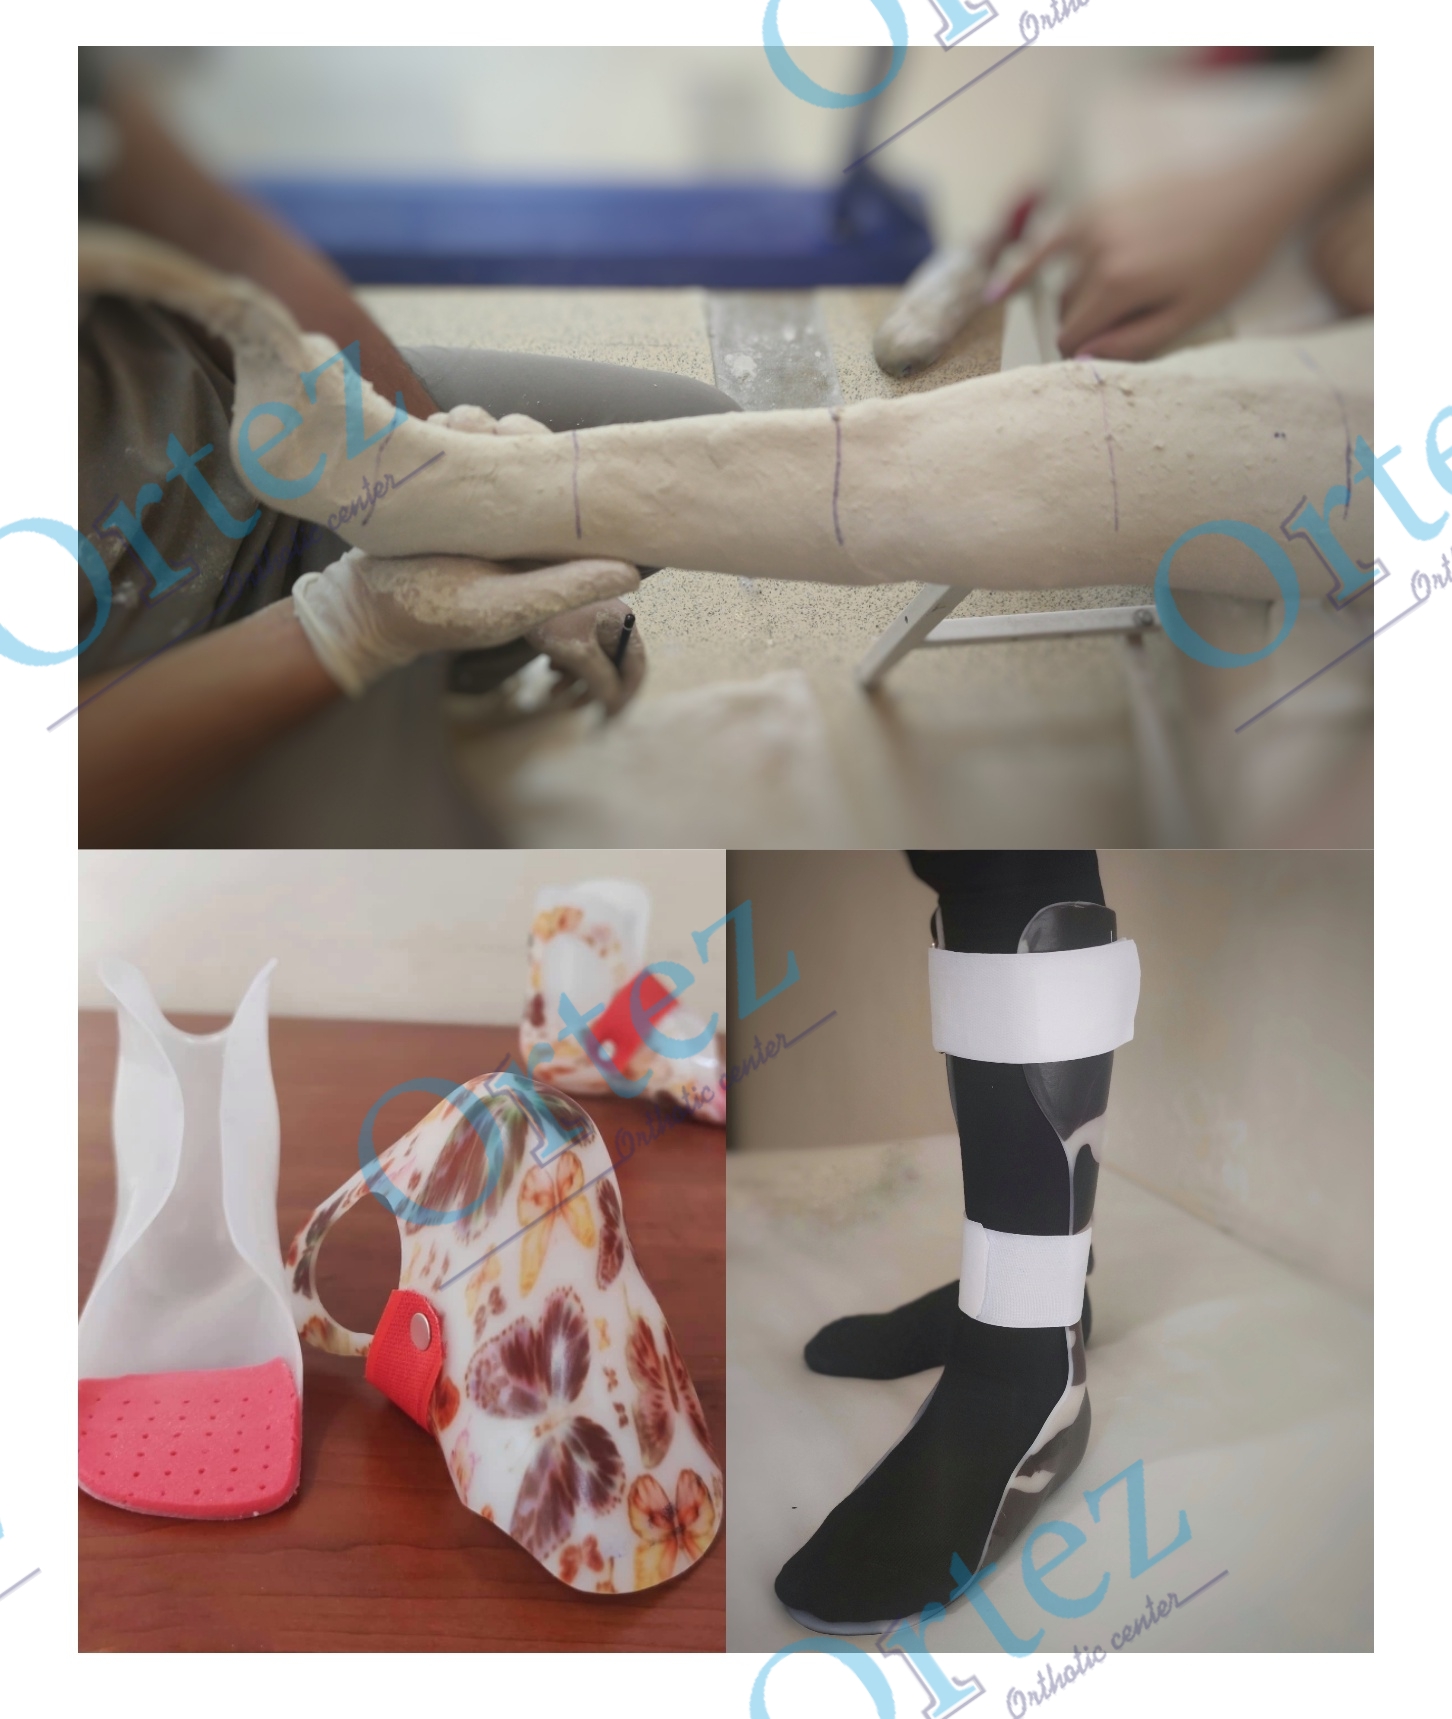 What is an orthosis